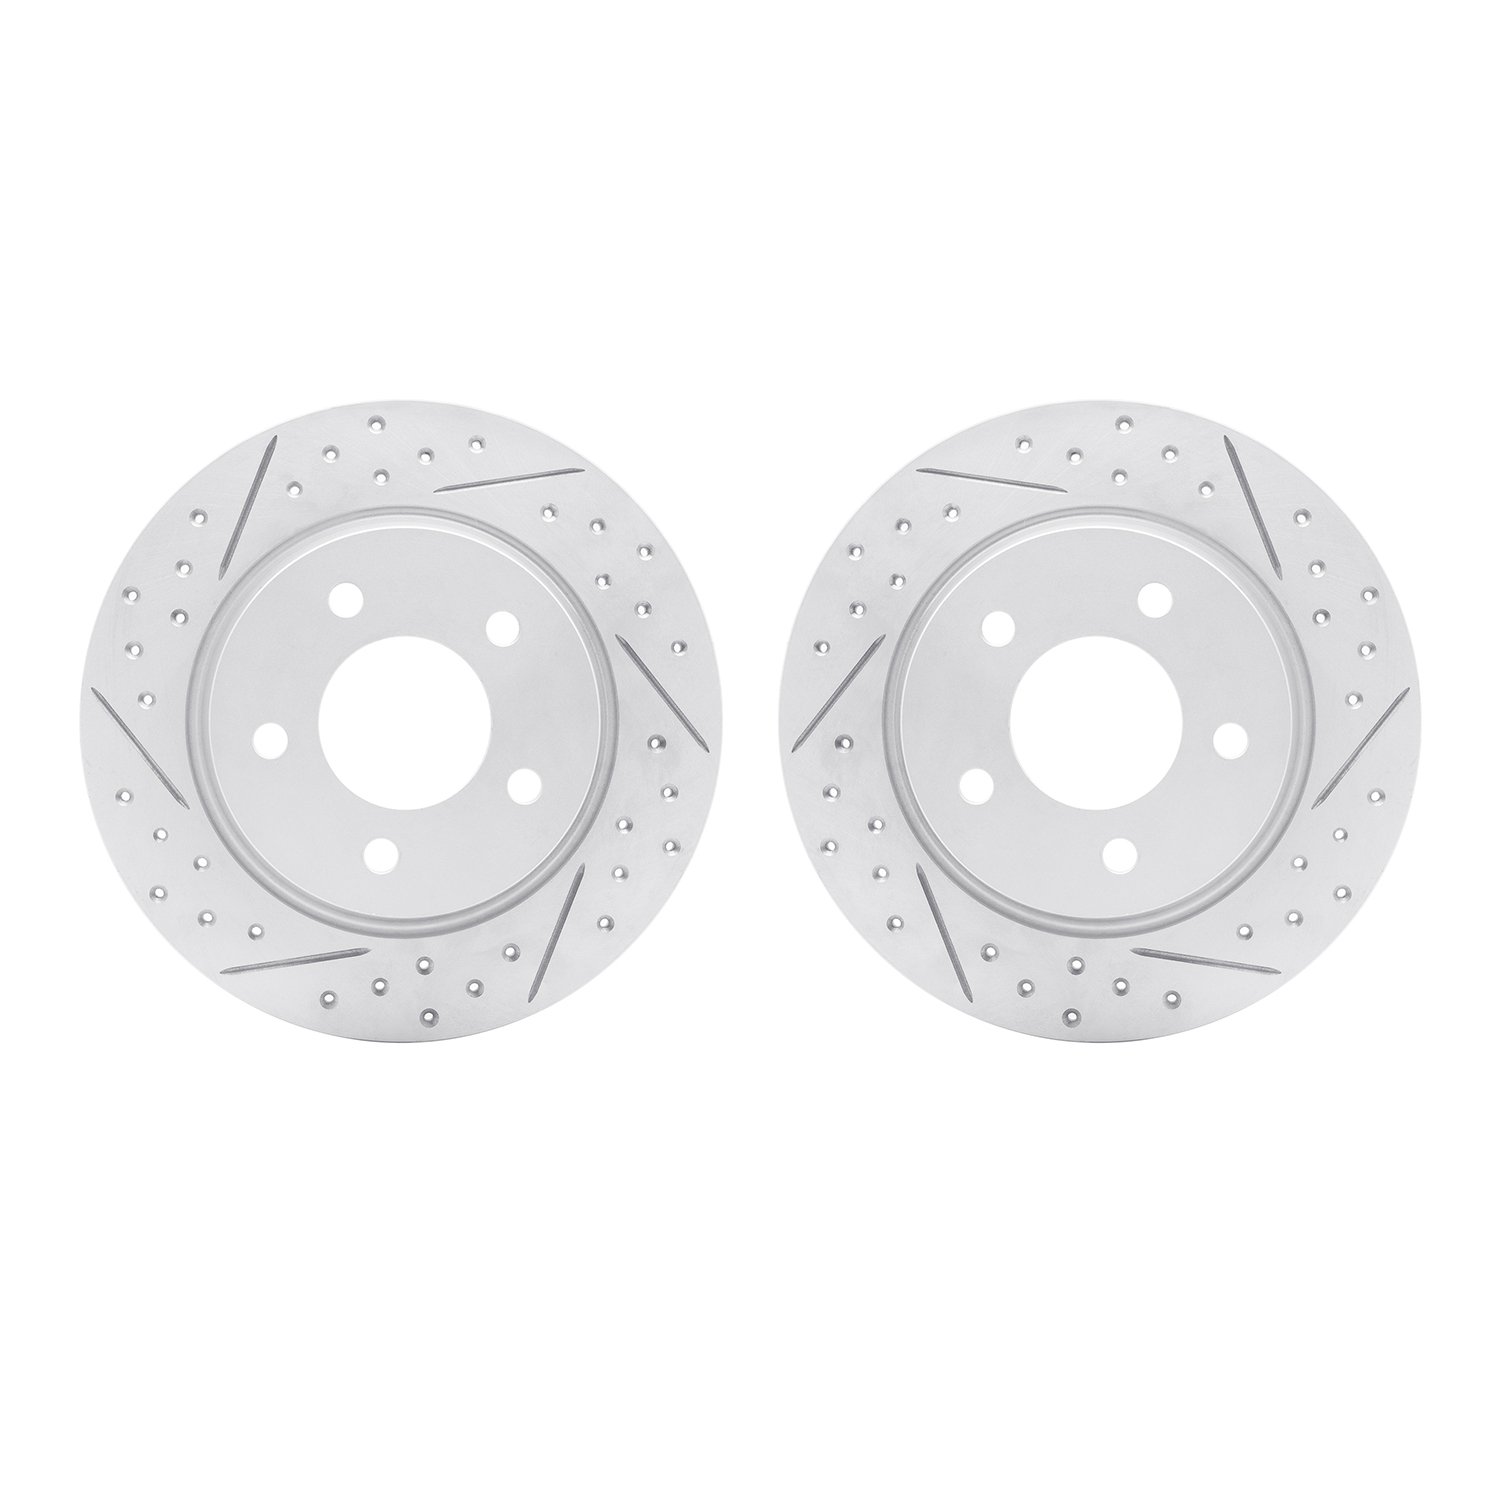 2002-80031 Geoperformance Drilled/Slotted Brake Rotors, 2004-2013 Ford/Lincoln/Mercury/Mazda, Position: Rear